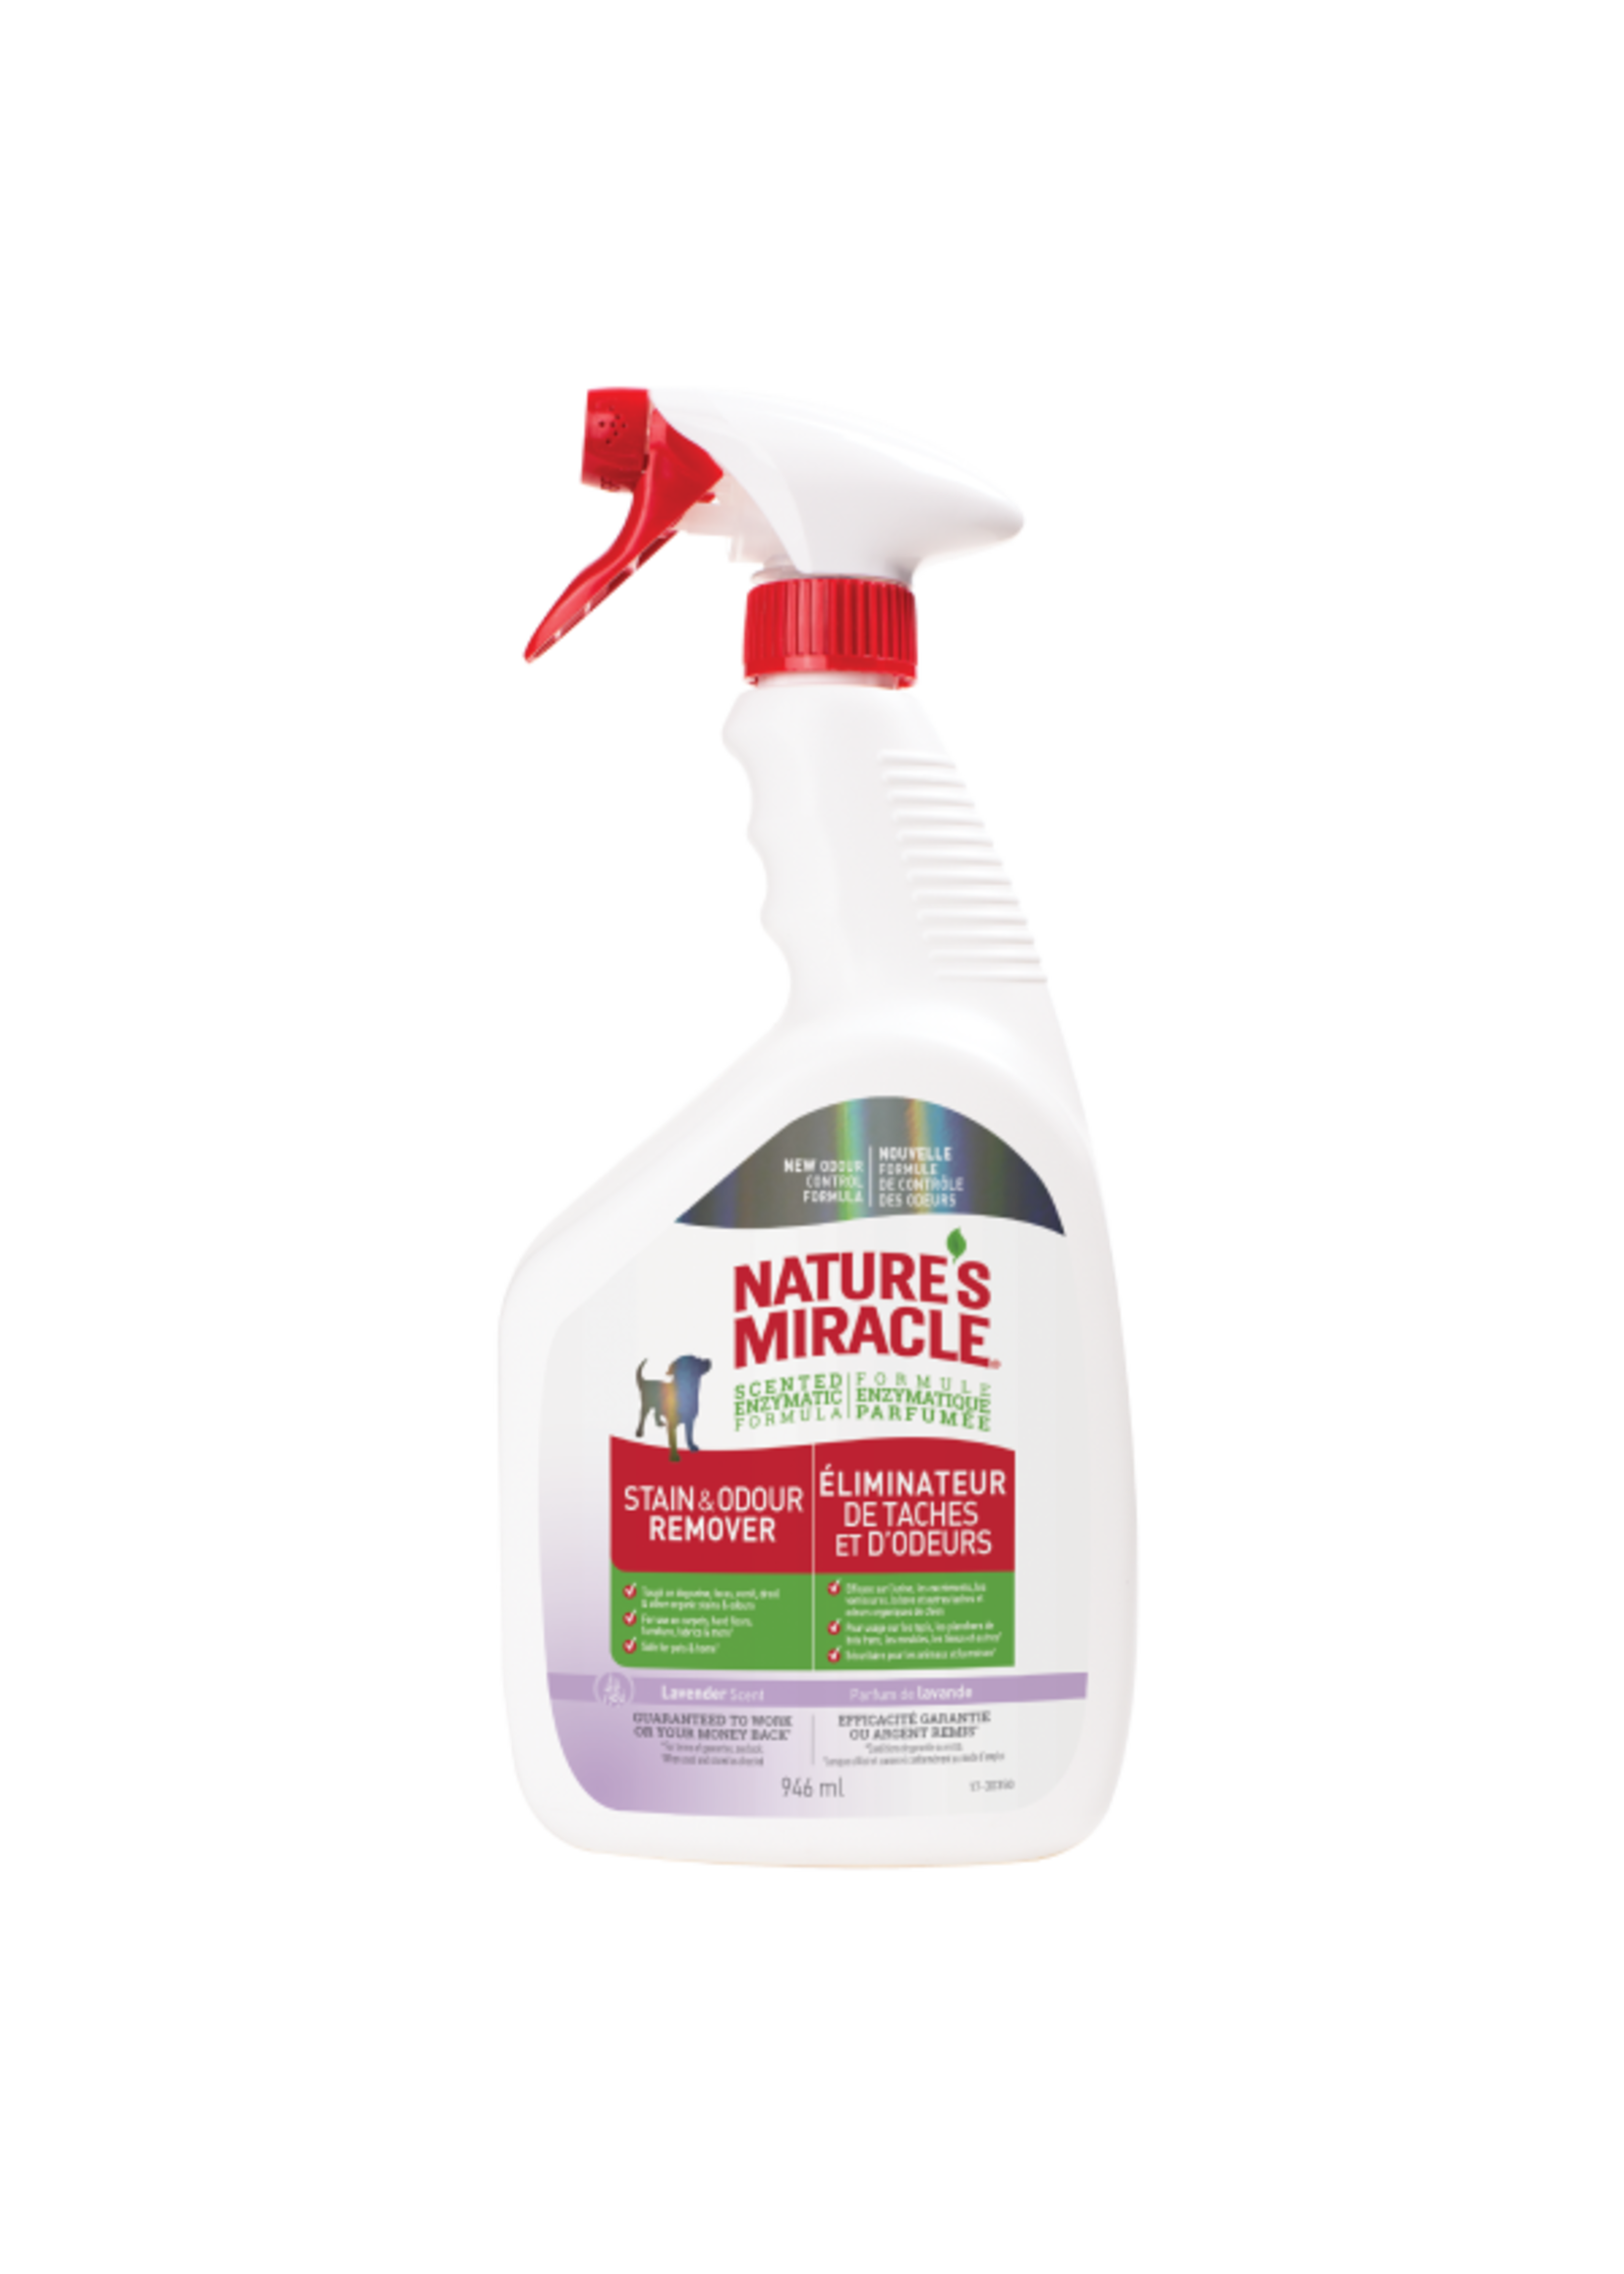 Nature's Miracle Natures Miracle - Dog Stain & Odour Remover Spray Lavender Scent 946 mL